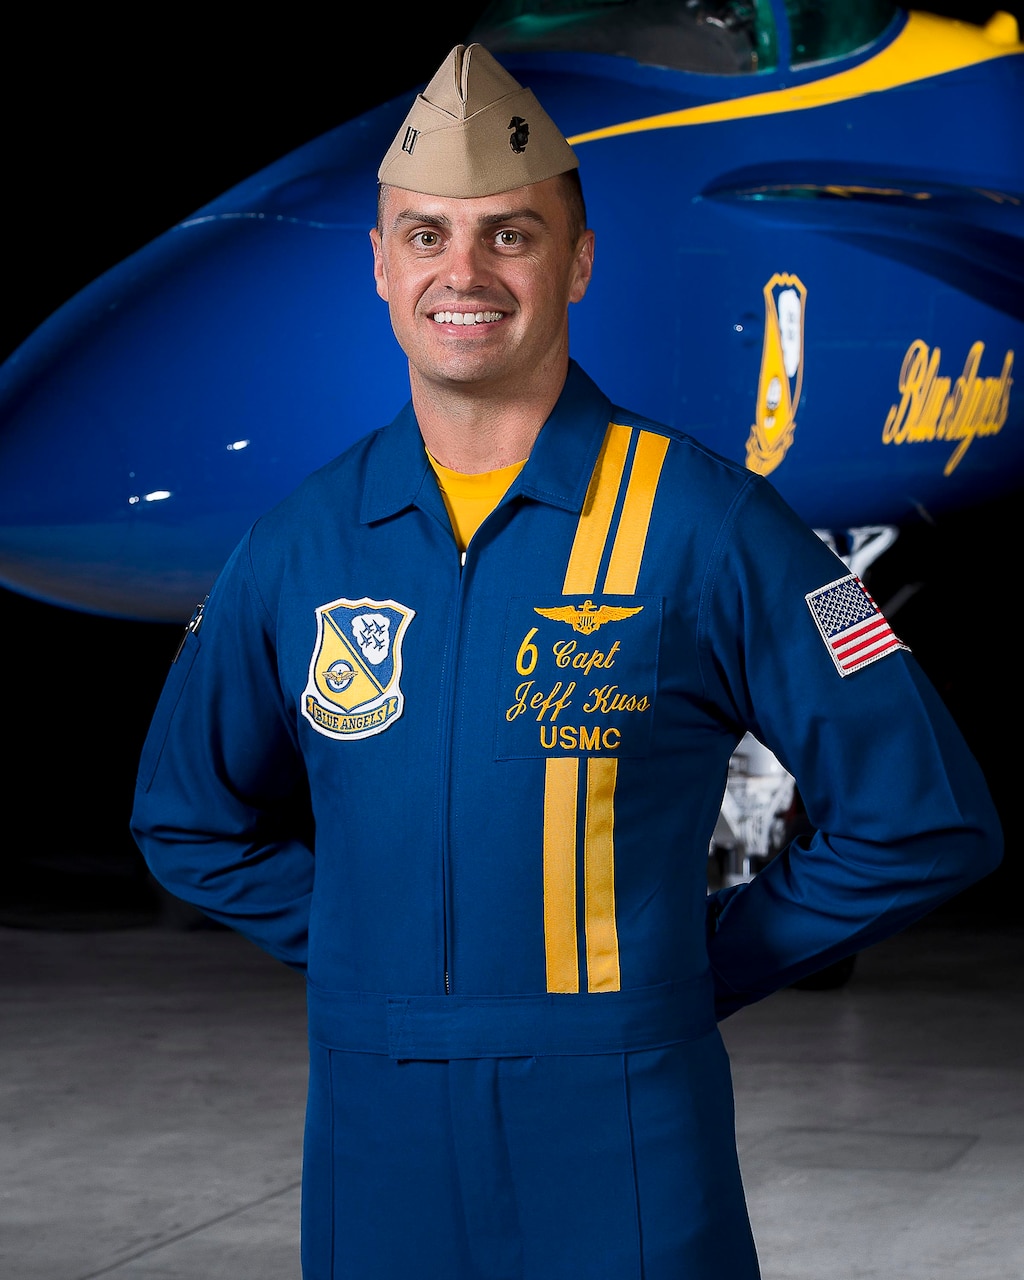 File photo of Marine Corps Capt. Jeff Kuss. Kuss, a member of the Navy’s Blue Angels flight demonstration squadron, died during a practice flight when the F/A-18C Hornet he was piloting crashed approximately two miles from the airport runway at Smyrna, Tenn., June 2, 2016. Navy photo